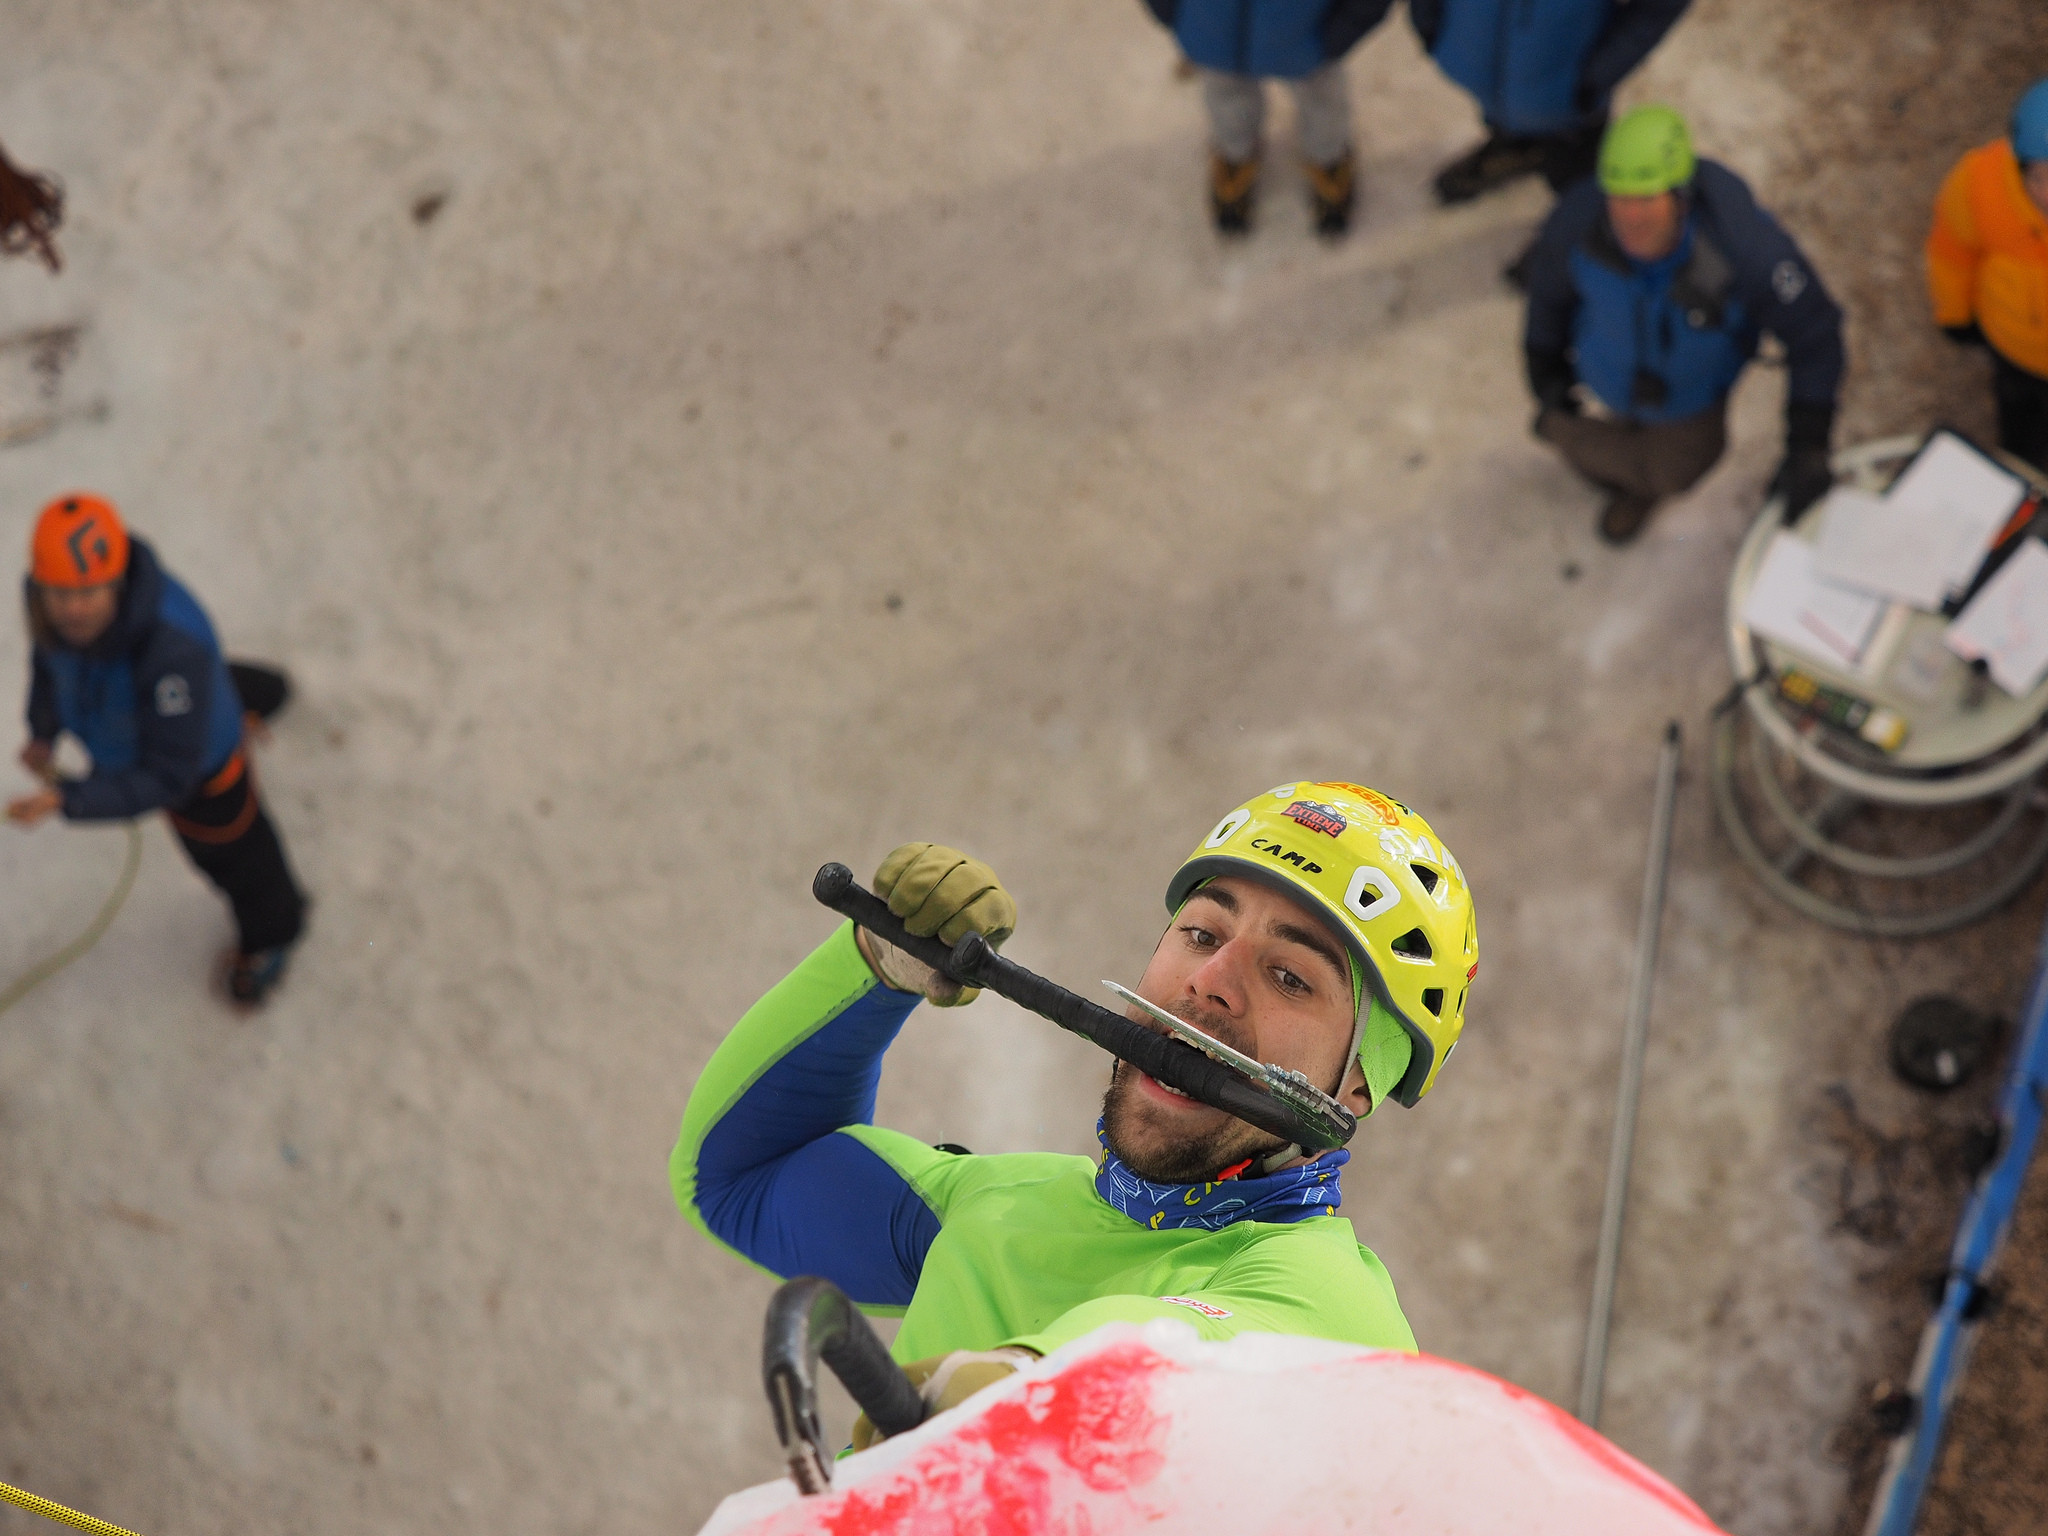 Lead finals conclude Ice Climbing World Cup in Switzerland